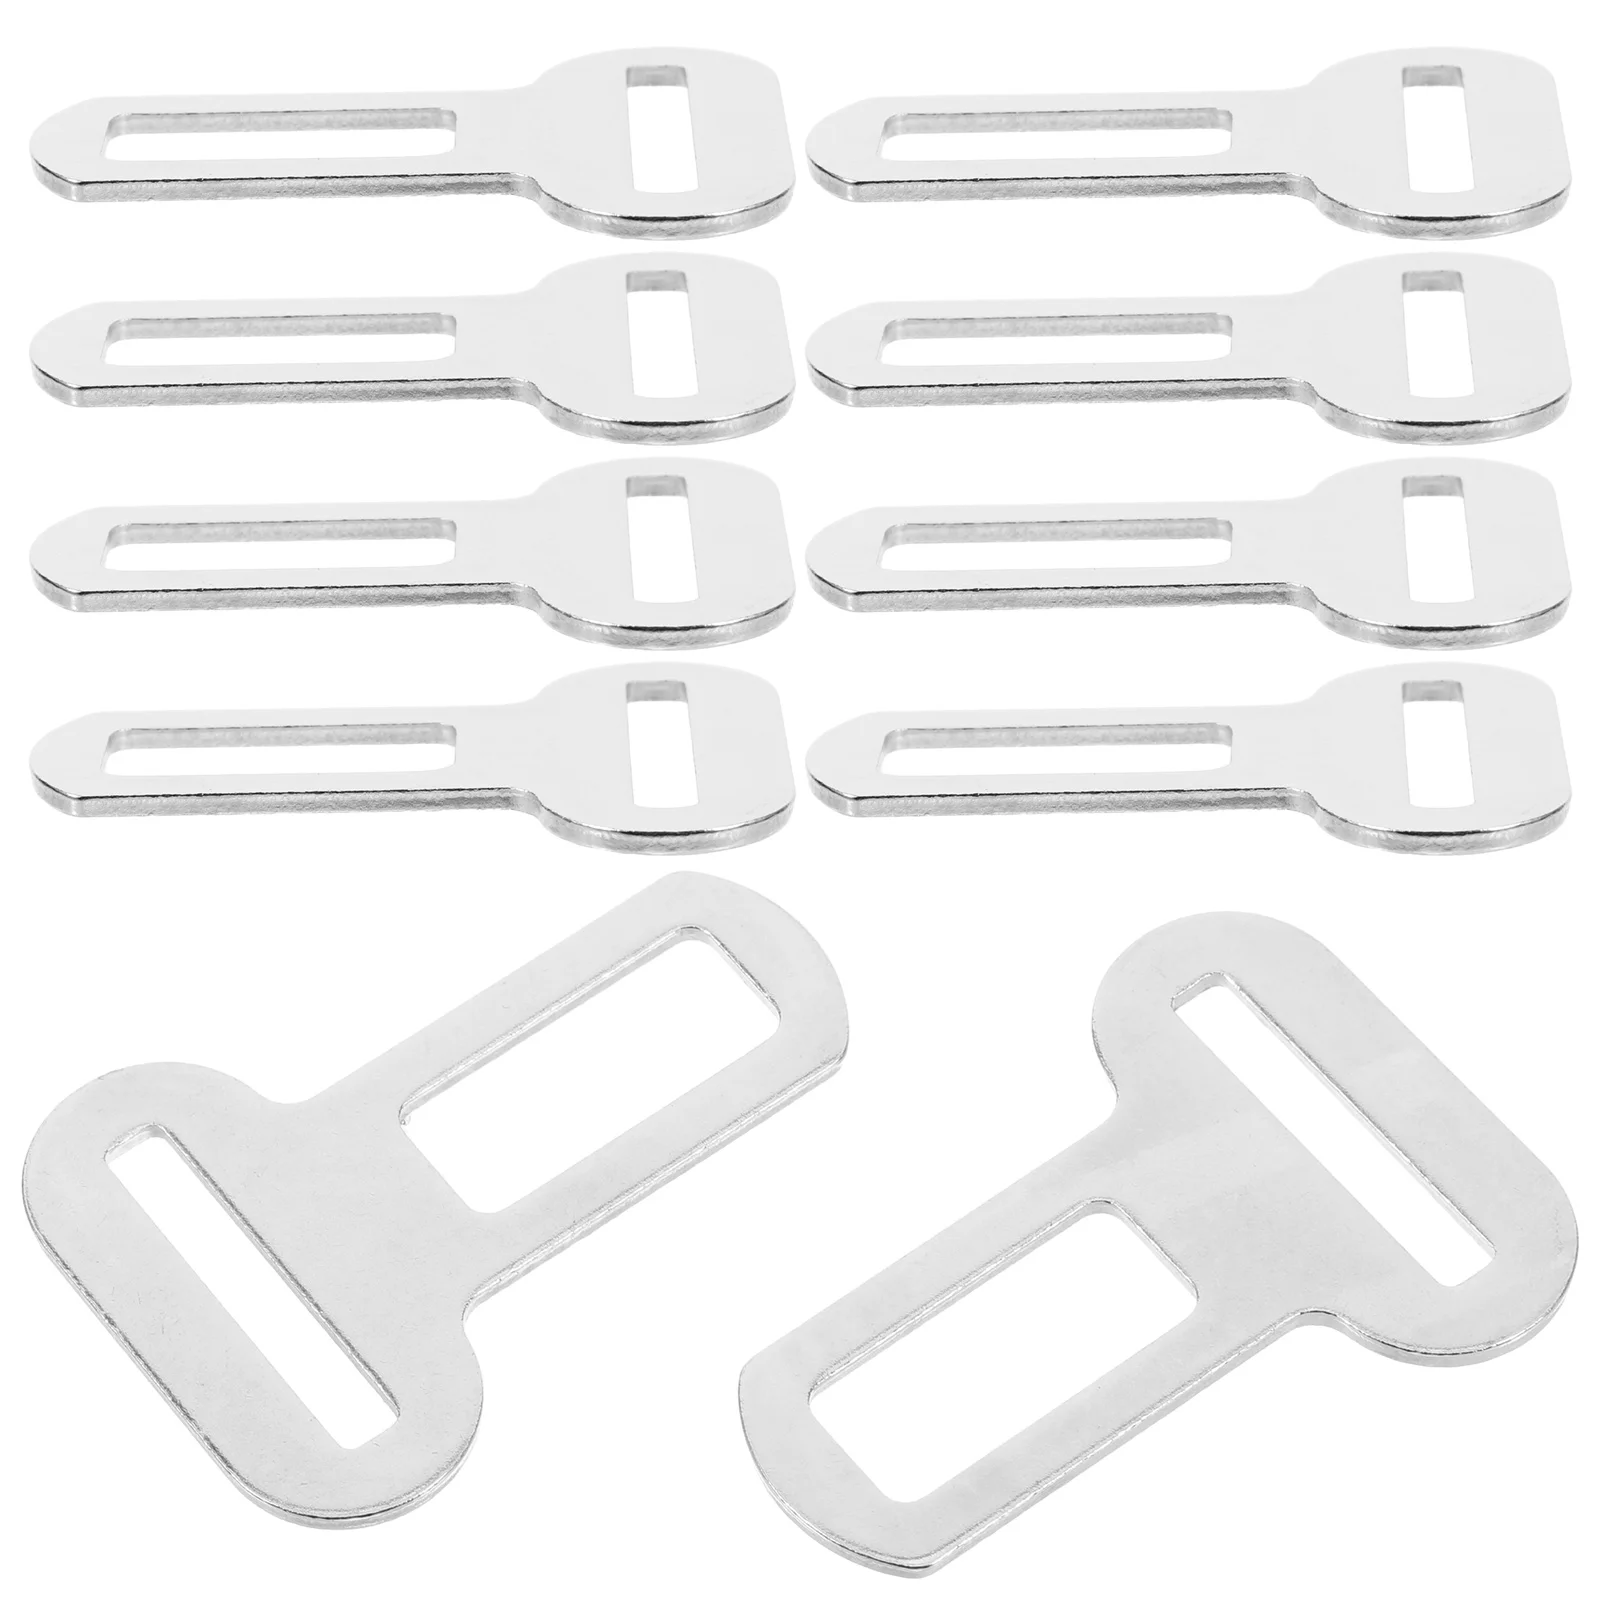 

10 Pcs Tow Straps Seatbelt Fastener Buckles Hauling Rope Fasteners Cushioning Iron Sheets Webbing Dog Chain